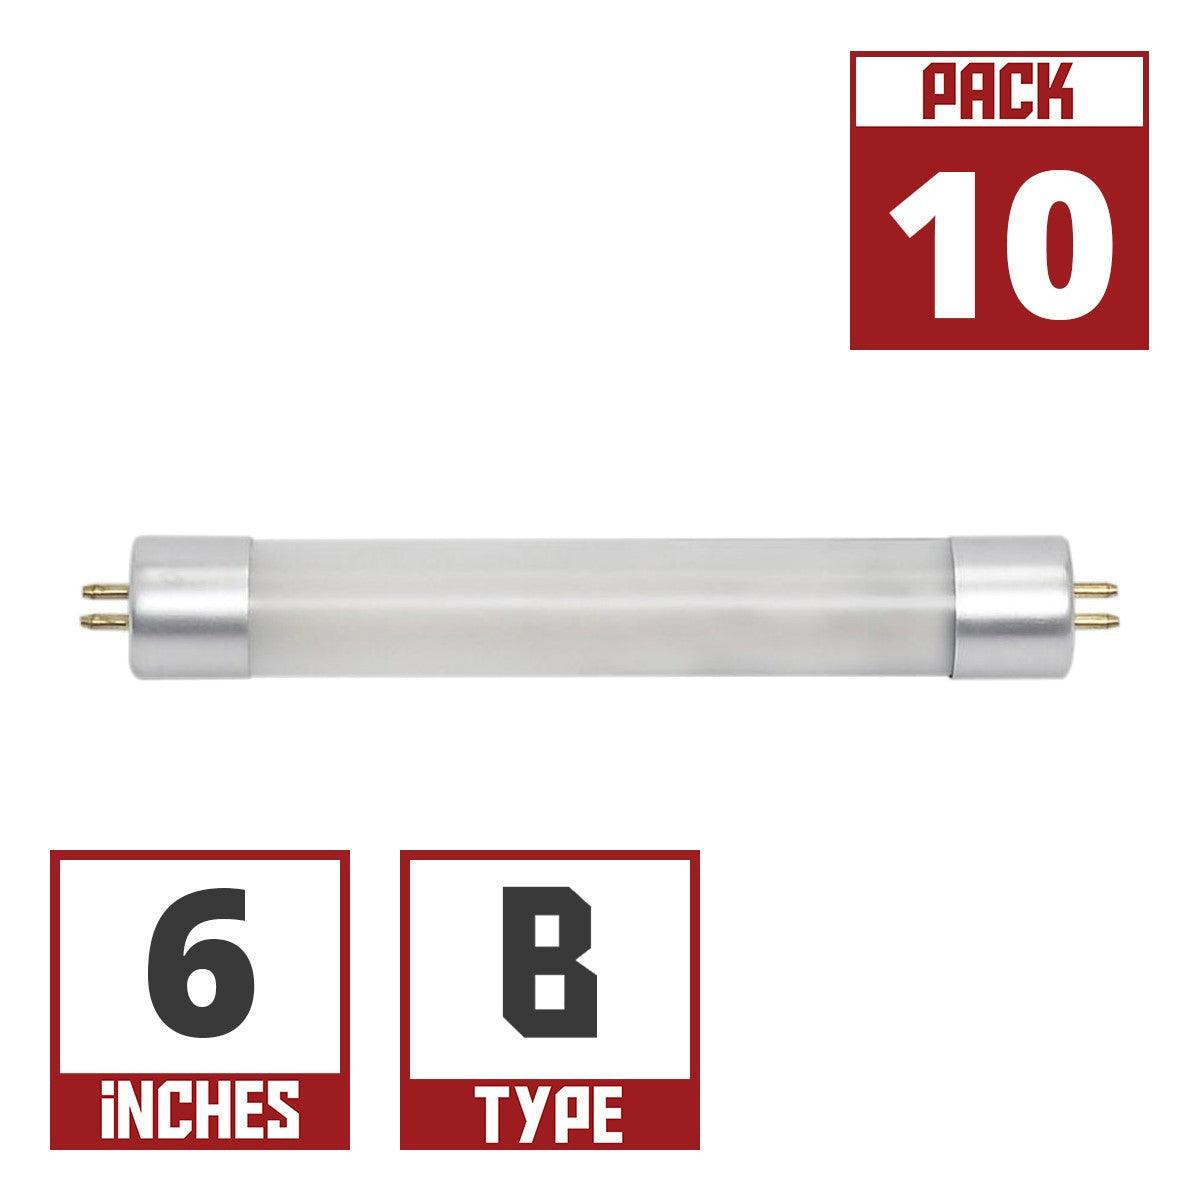 6 Inch LED mini T5 Tube, 2 Watt, 150 Lumens, 4000K, F4T5 Replacement, Ballast Bypass Double End, G5 Base (Case Of 10) - Bees Lighting